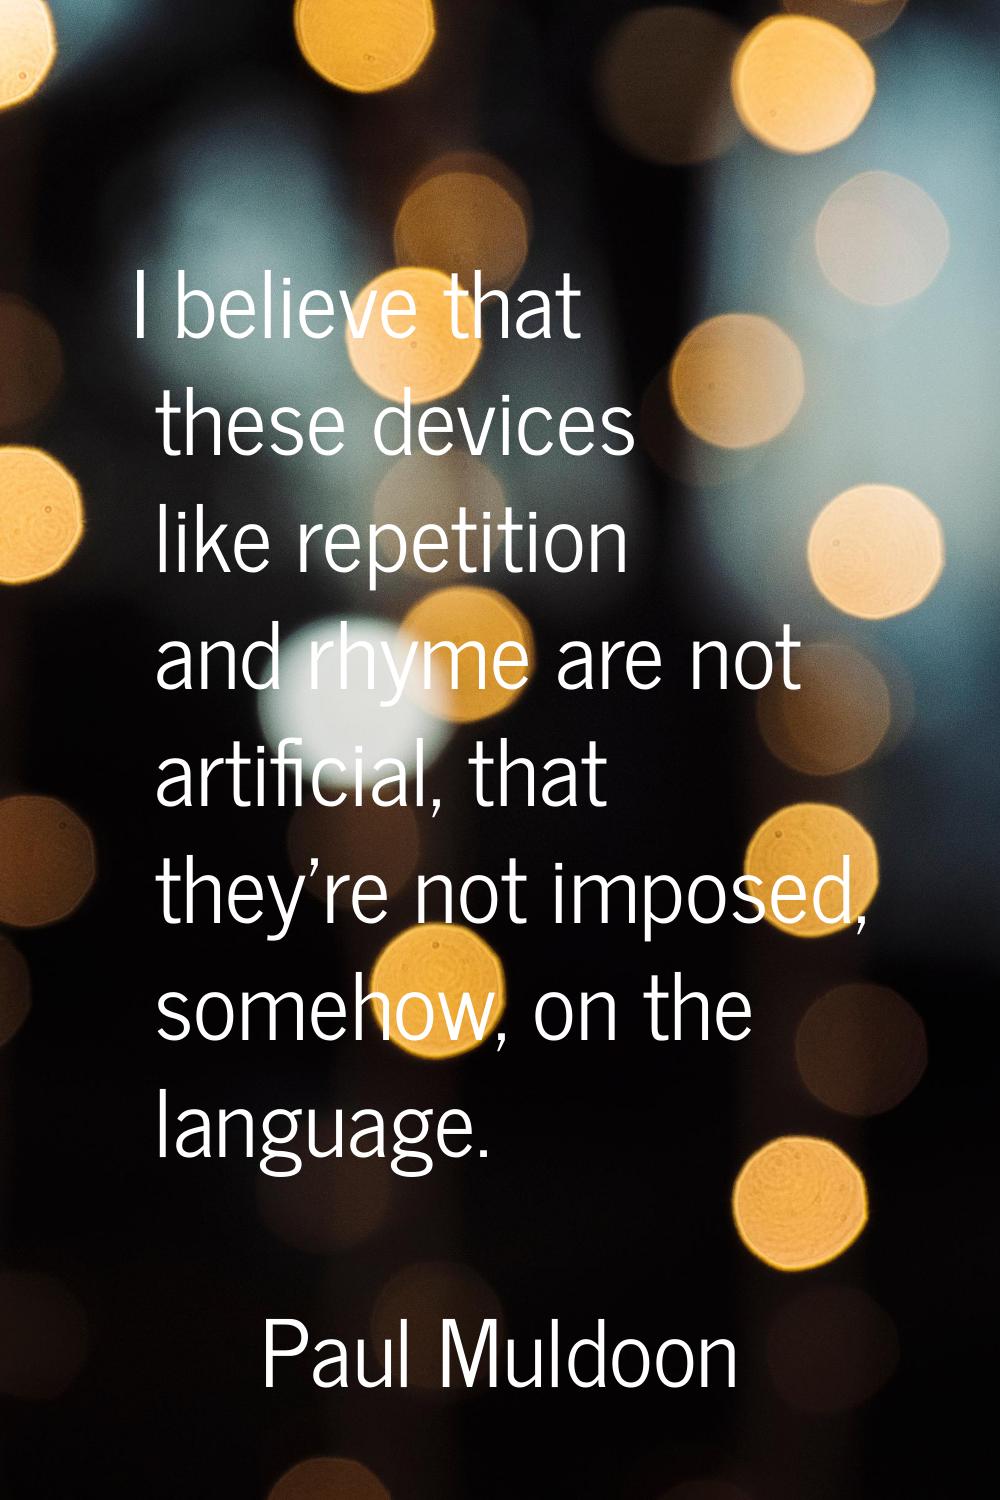 I believe that these devices like repetition and rhyme are not artificial, that they're not imposed